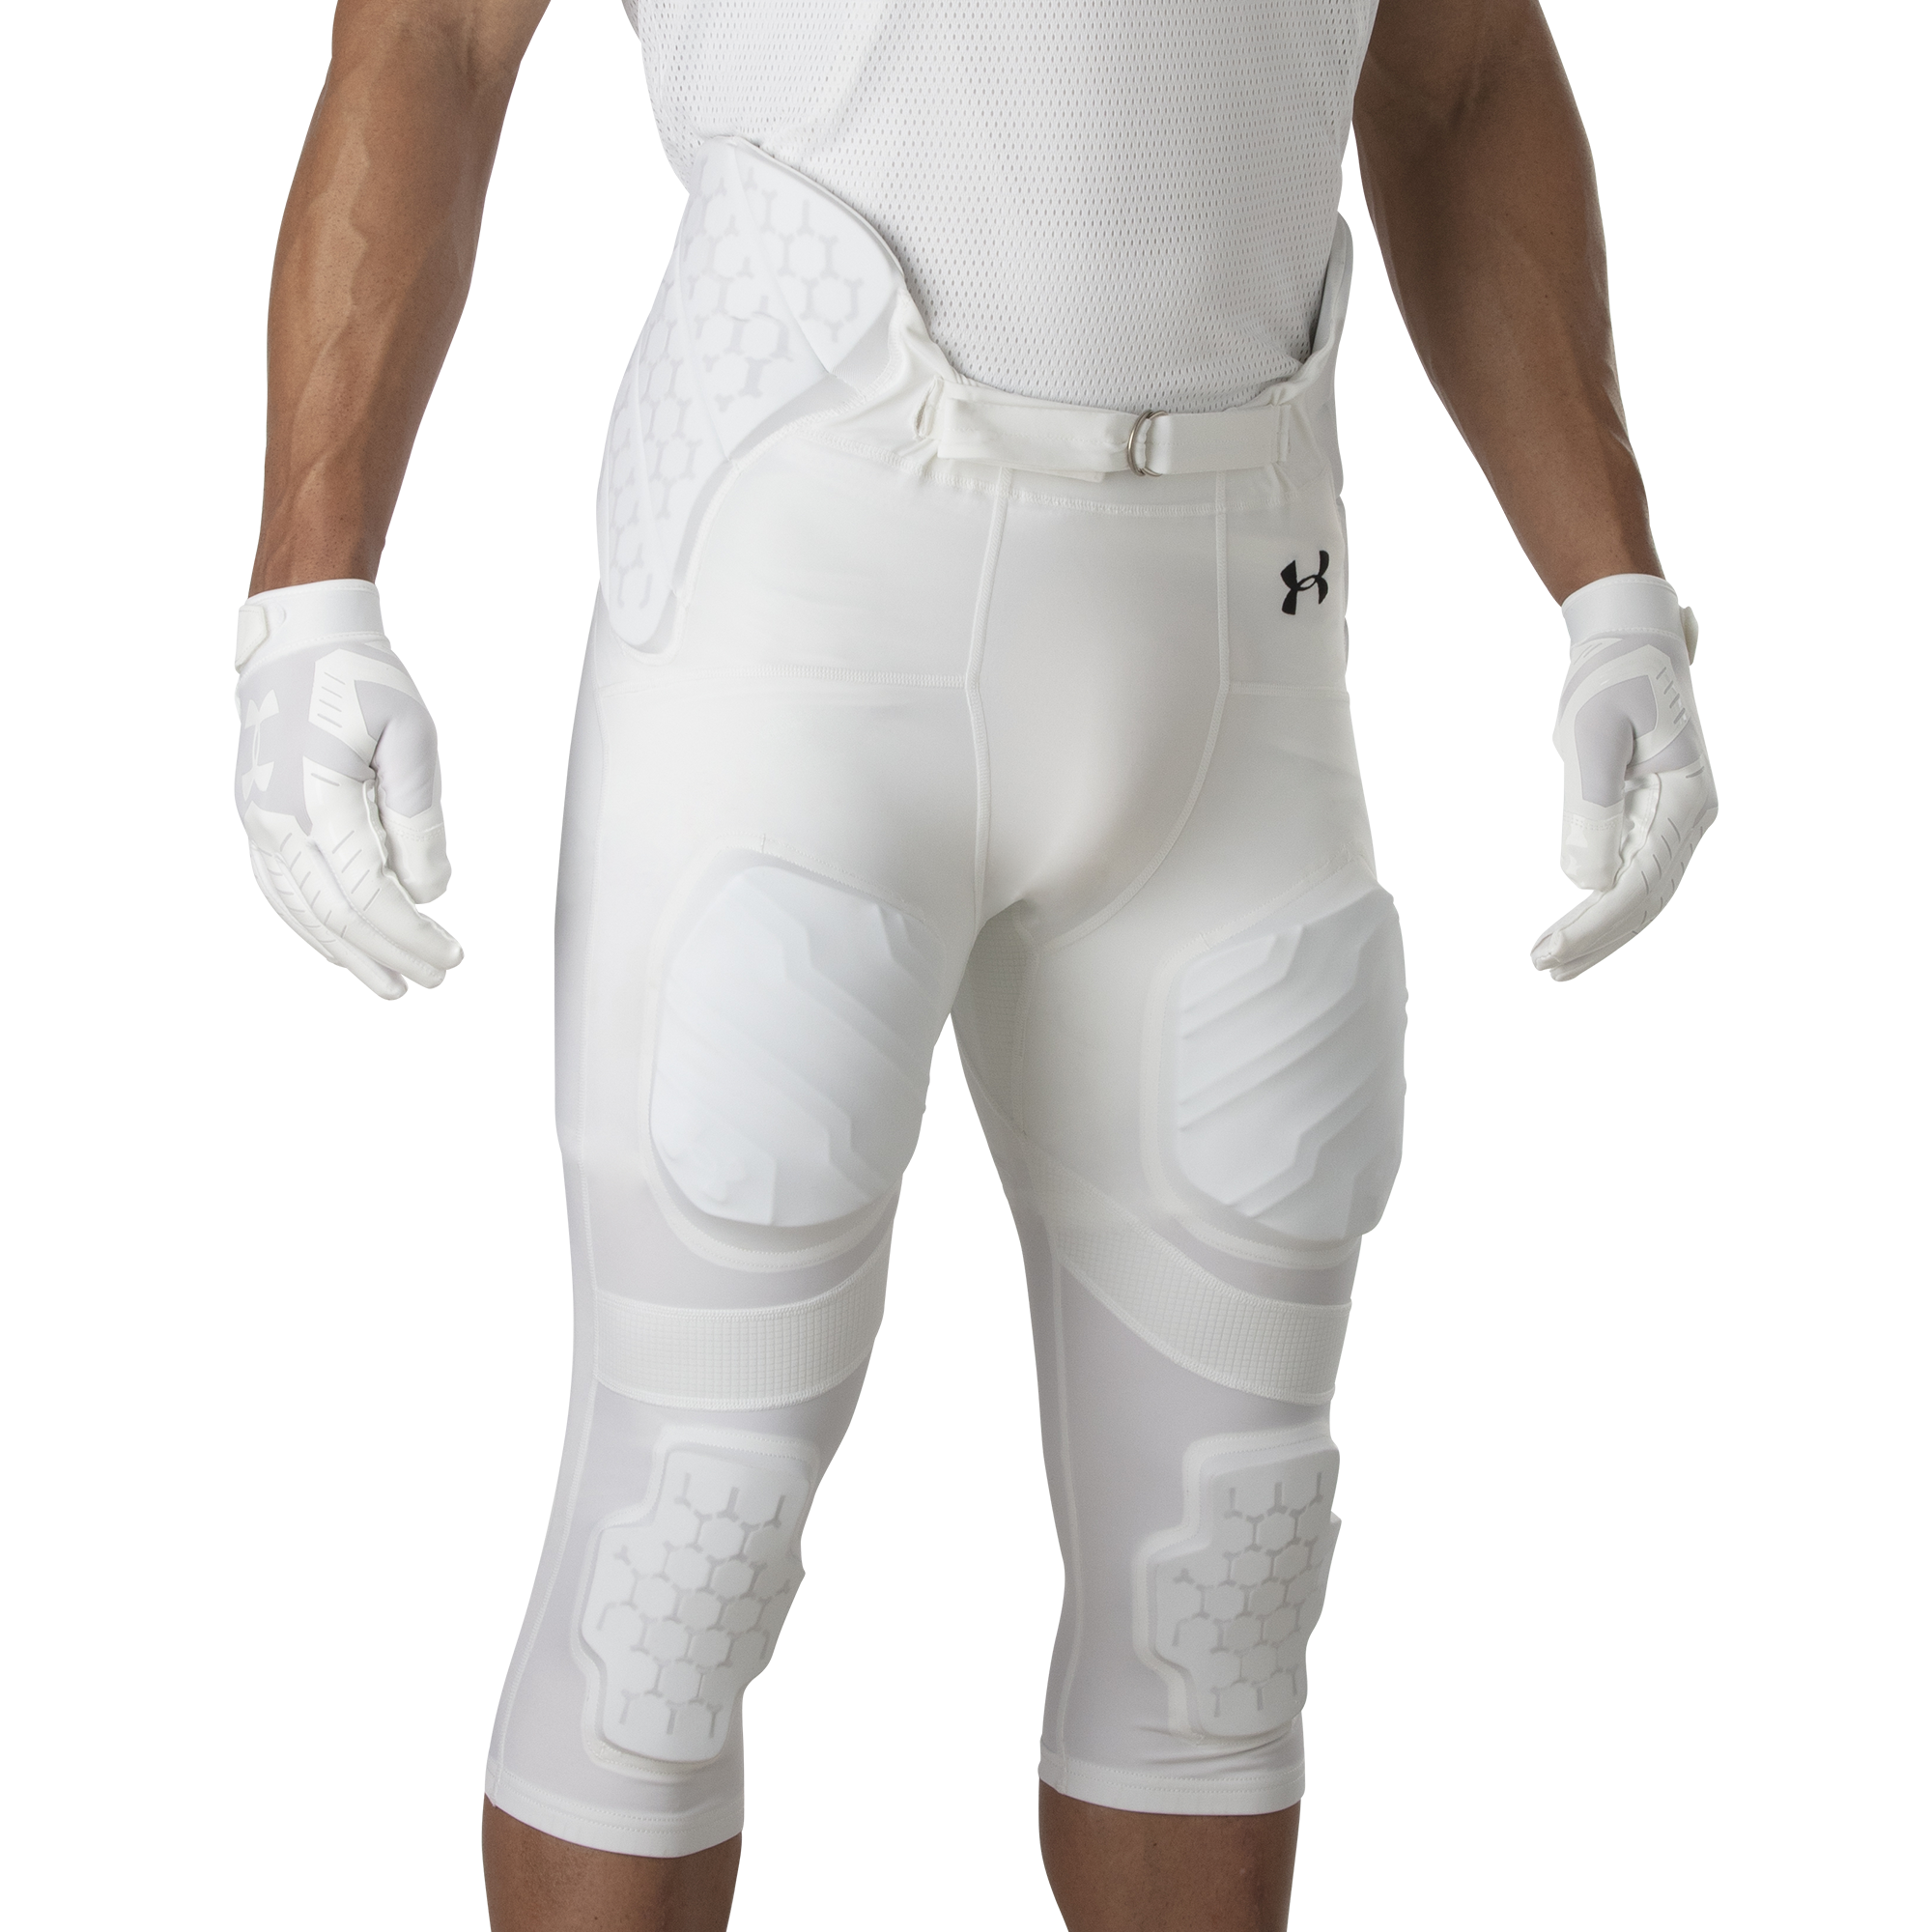 Under Armour Youth Gameday Armour Integrated Football Pants - White, Size: Large